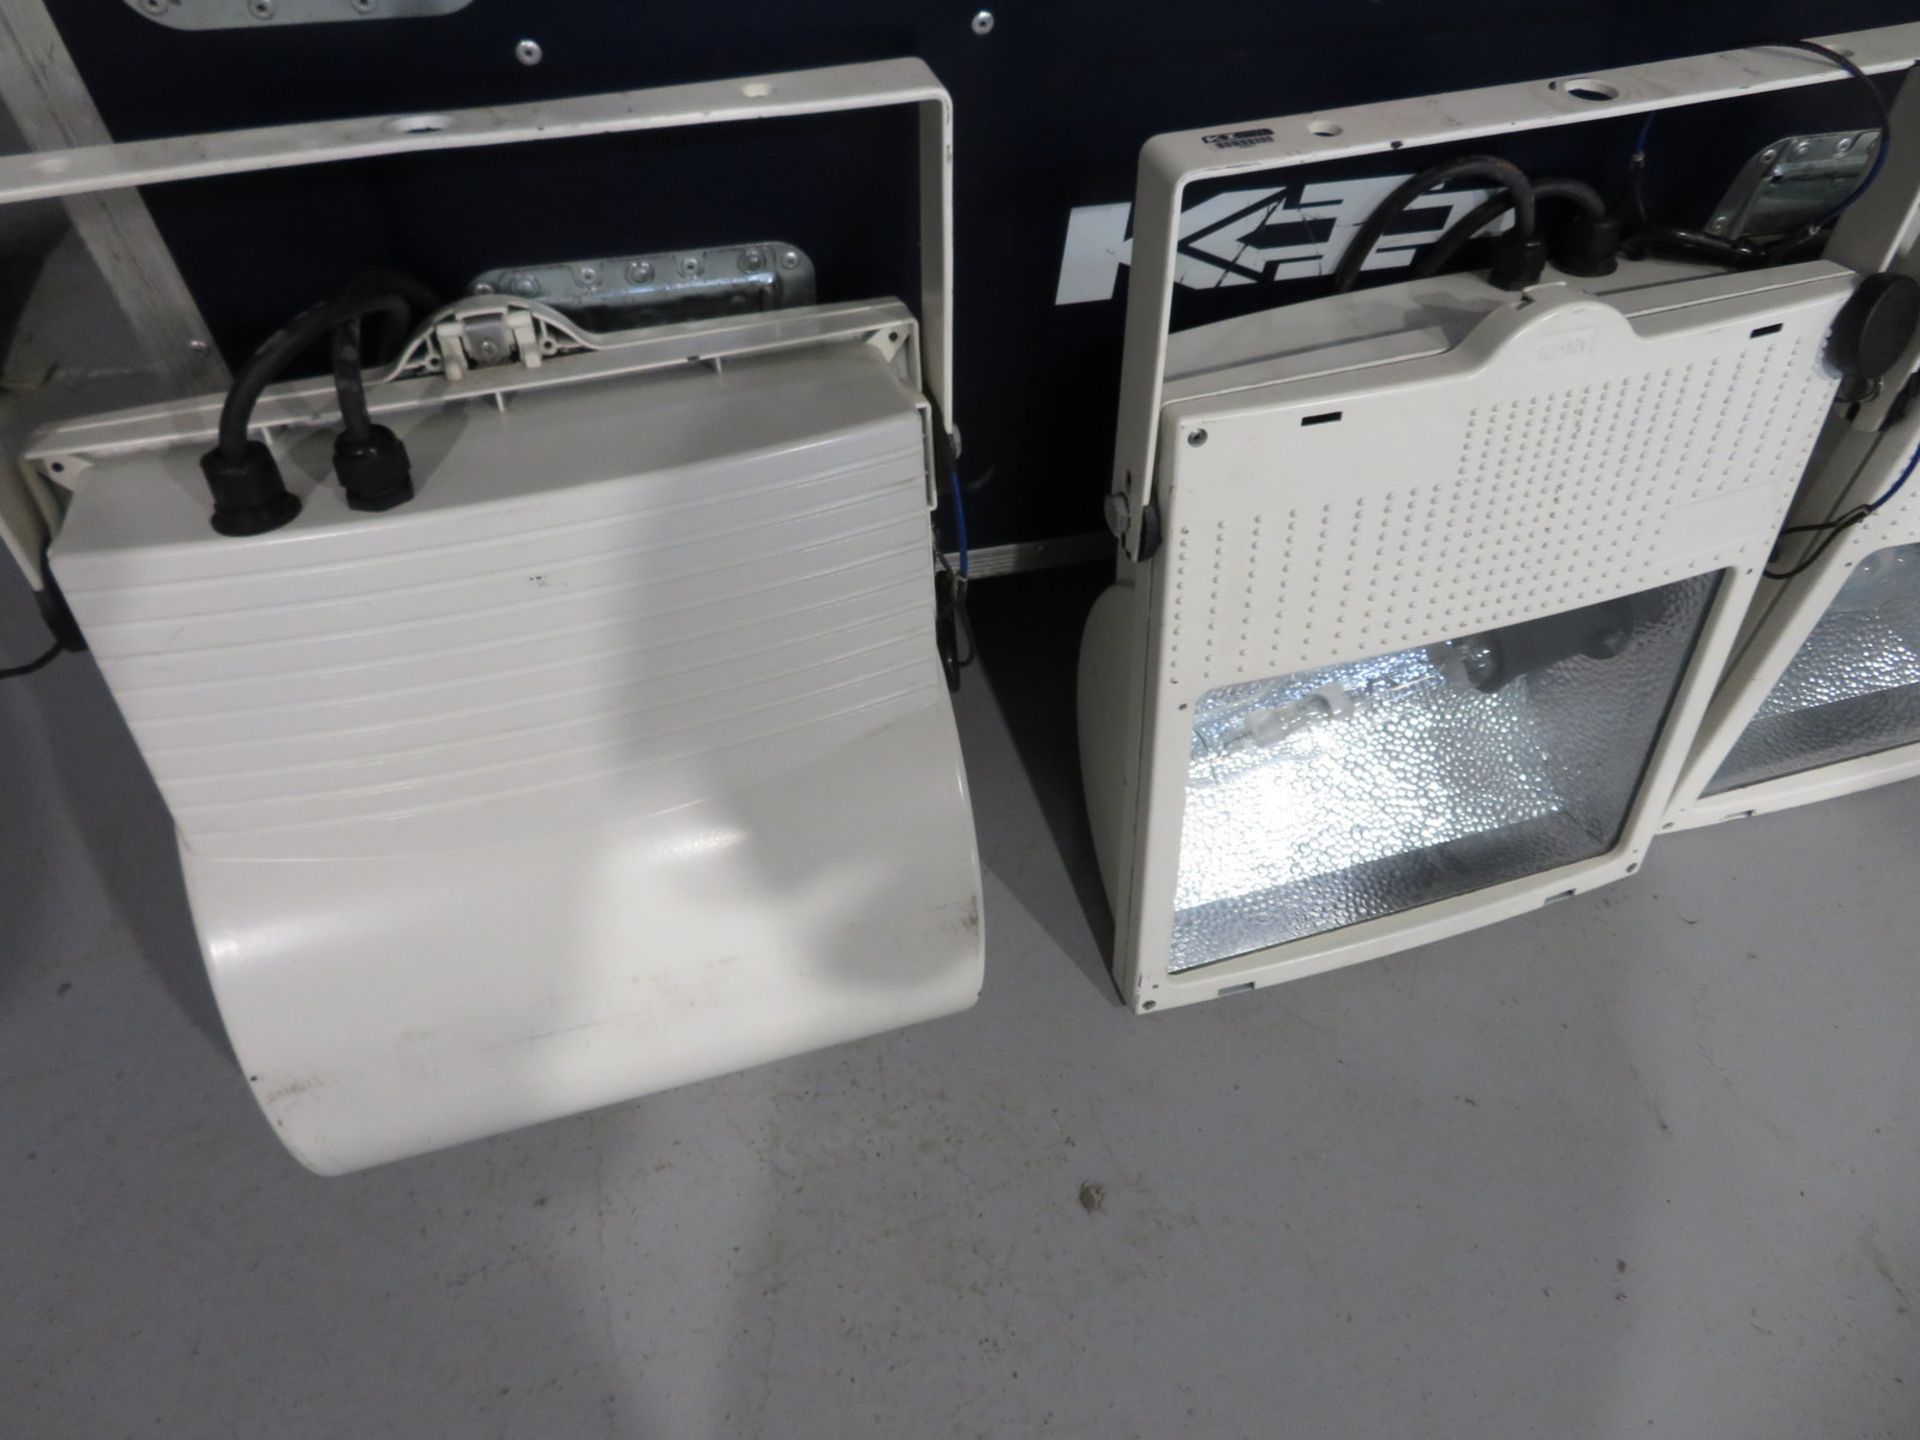 6x HQI 400w Floodlights in flight case. Includes safety bonds. Working condition. - Image 6 of 6